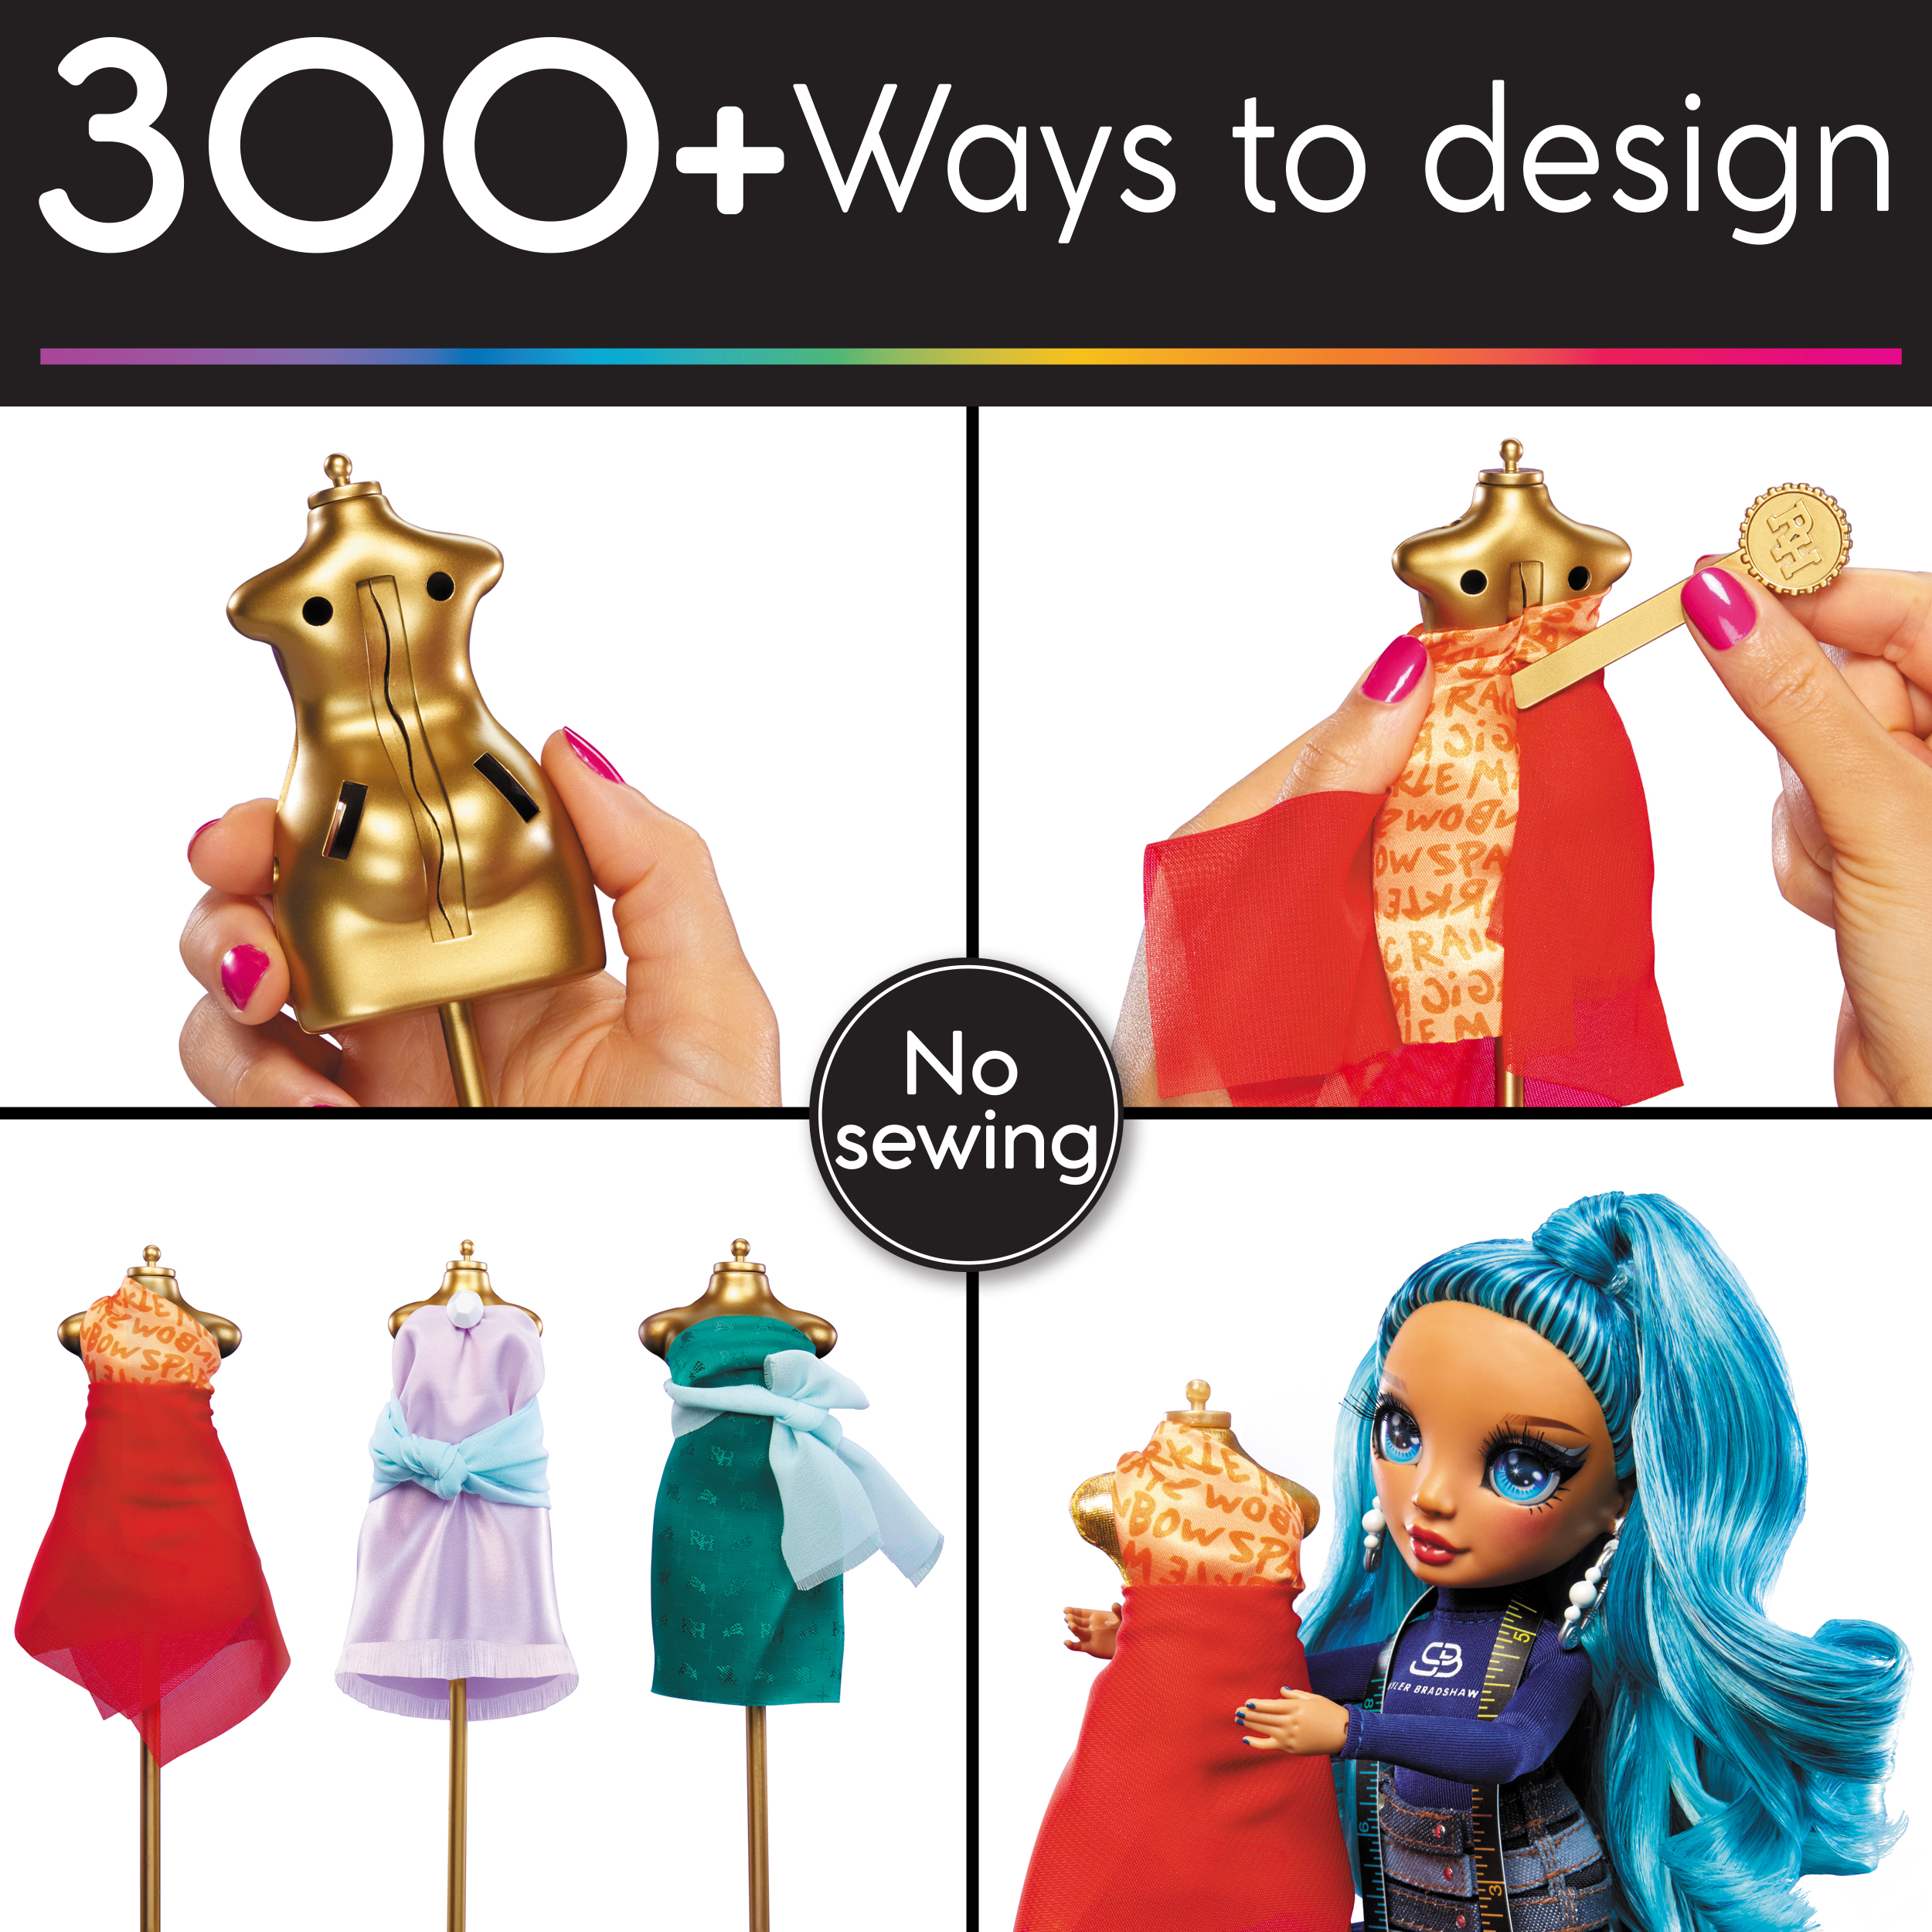 Rainbow High Dream & Design Fashion Studio, Designer Playset with Collectible Blue Skyler Doll +Easy No Sew Fashion Kit Kids Toy Gift 4-12 - image 4 of 8